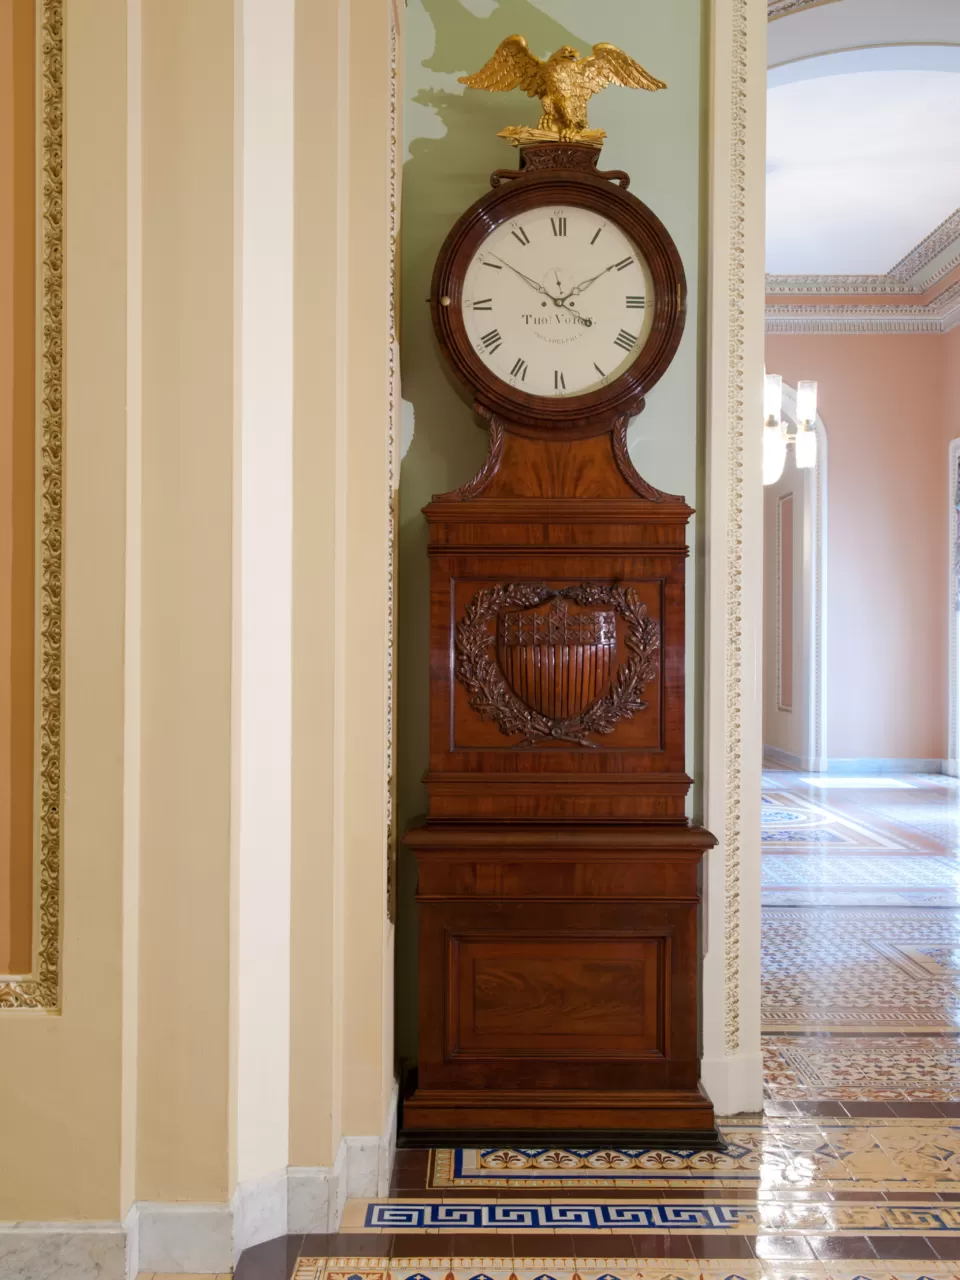 The Voigt clock in the U.S. Capitol, also known as the "Ohio clock."